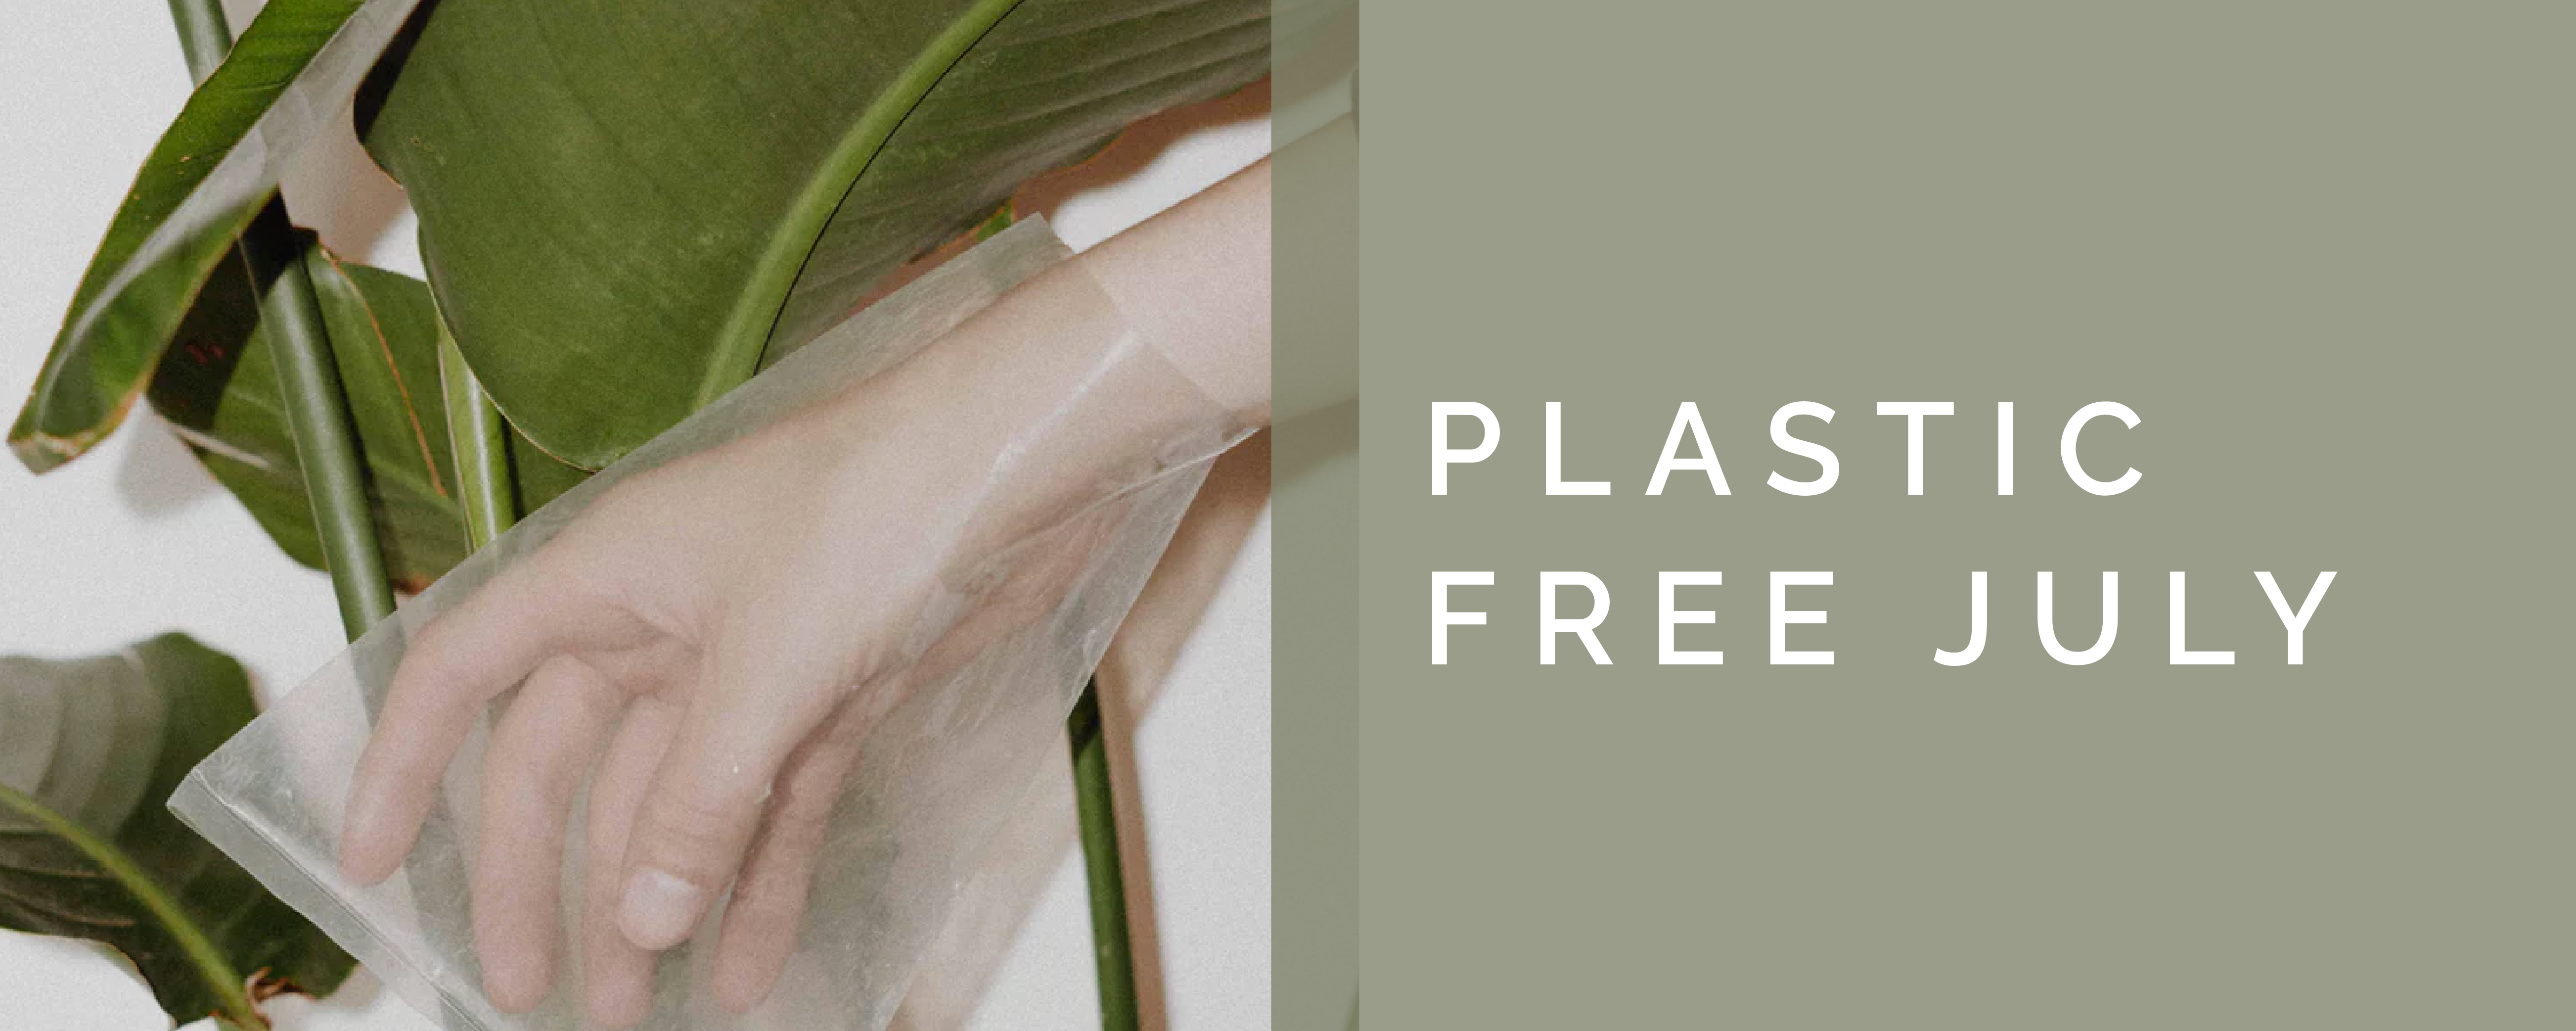 #Plasticfreejuly at Azura Bay - New Compostable + More Recyclable Packaging